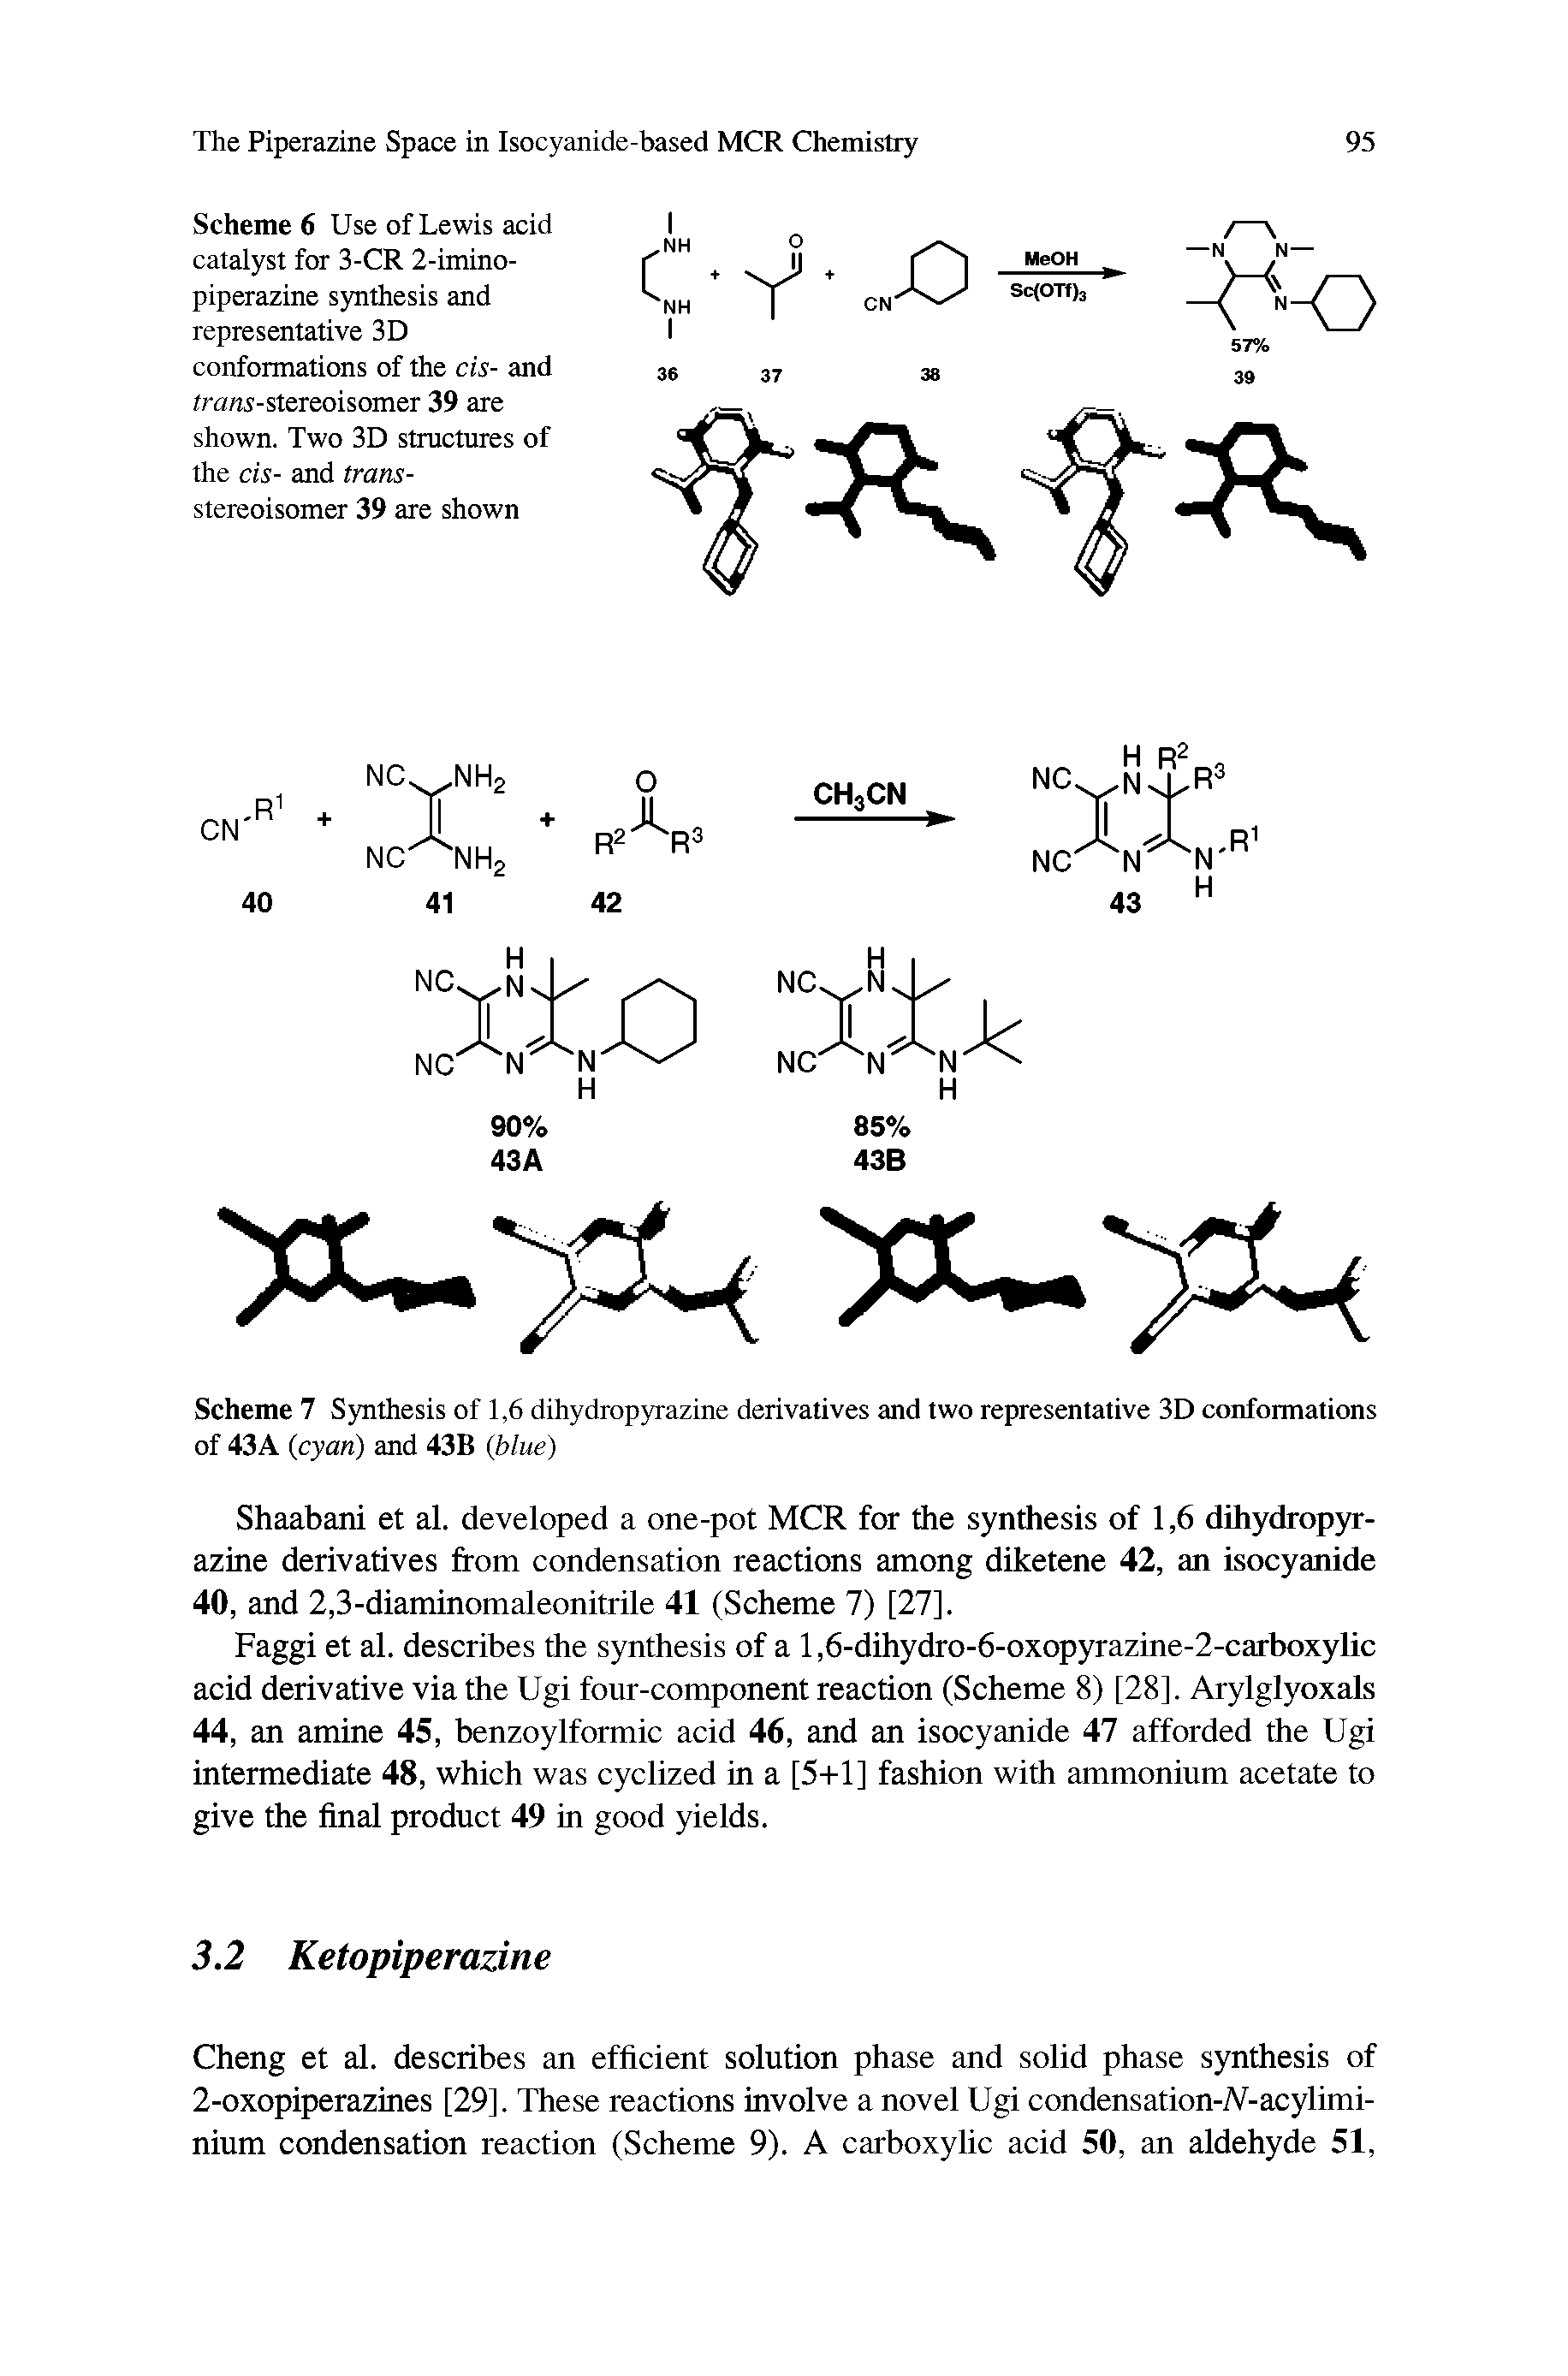 Scheme 6 Use of Lewis acid catalyst for 3-CR 2-imino-piperazine synthesis and representative 3D conformations of the cis- and trans-stereoisomer 39 are shown. Two 3D structures of the cis- and trans-stereoisomer 39 are shown...